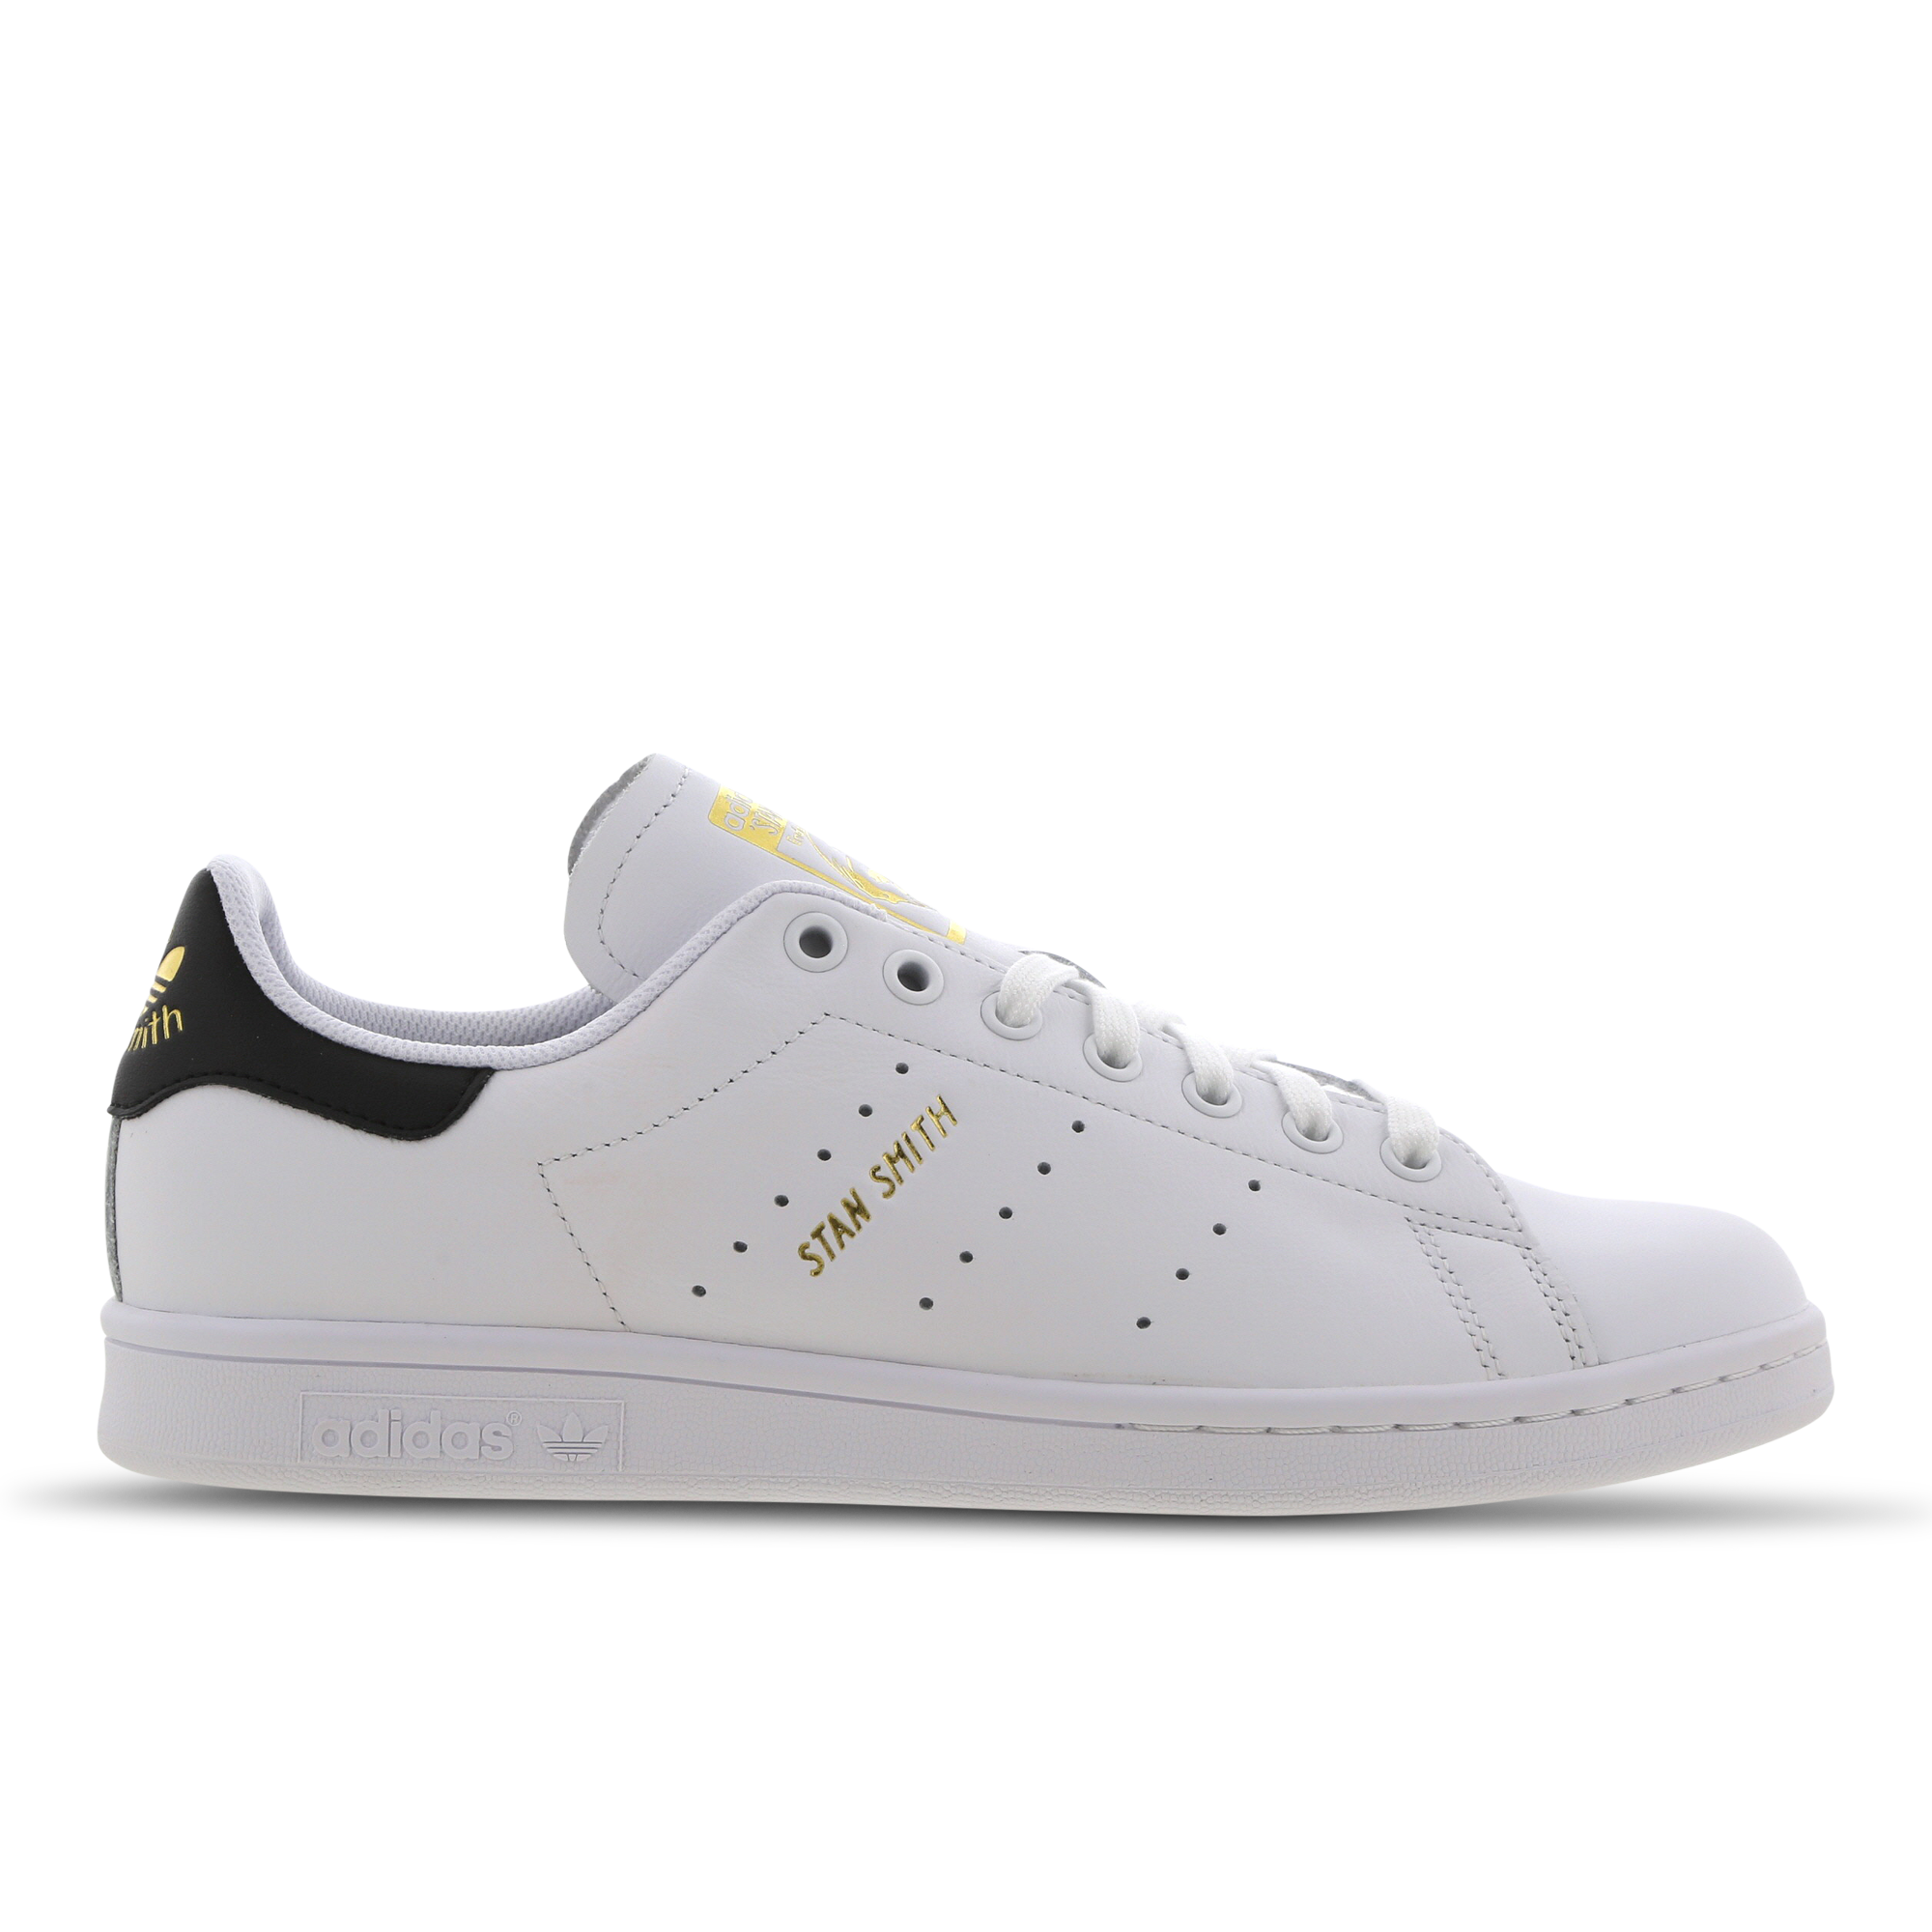 stan smith mens shoes